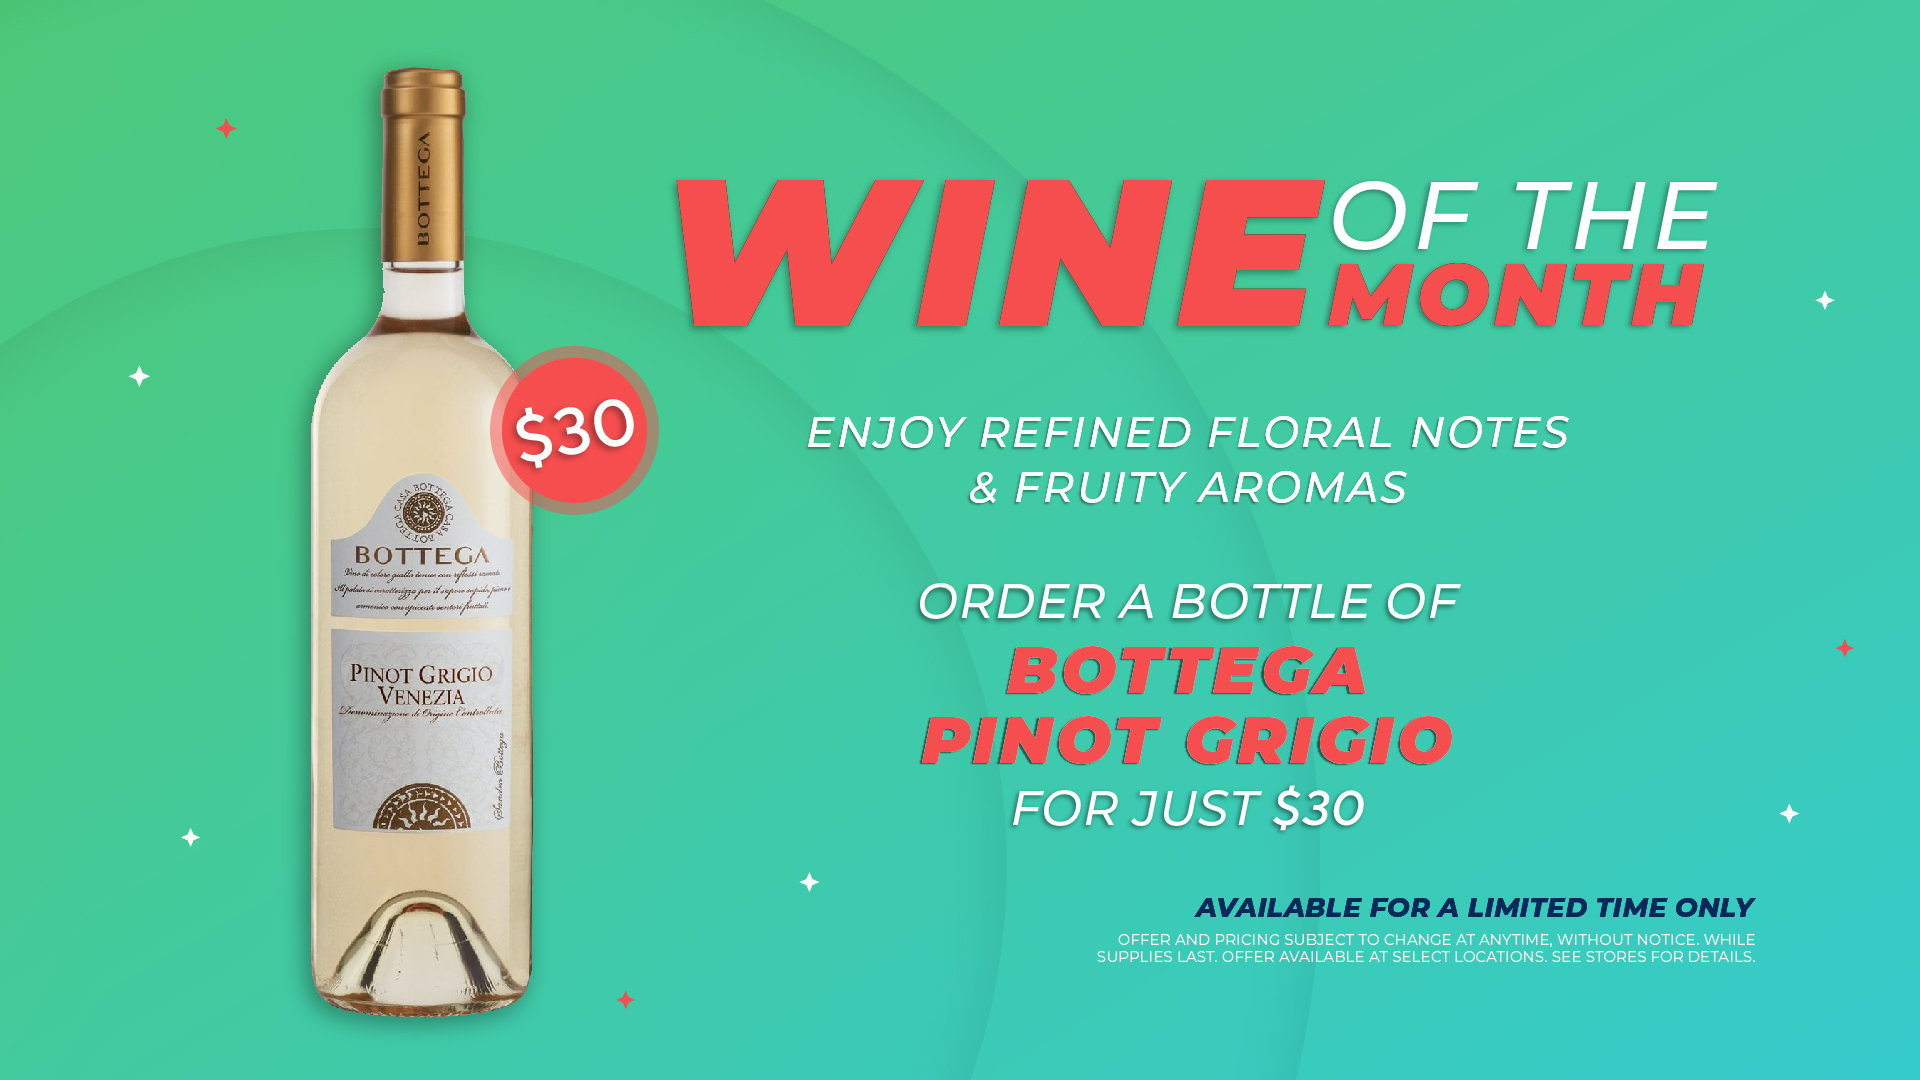 Cinepolis Wine of the Month